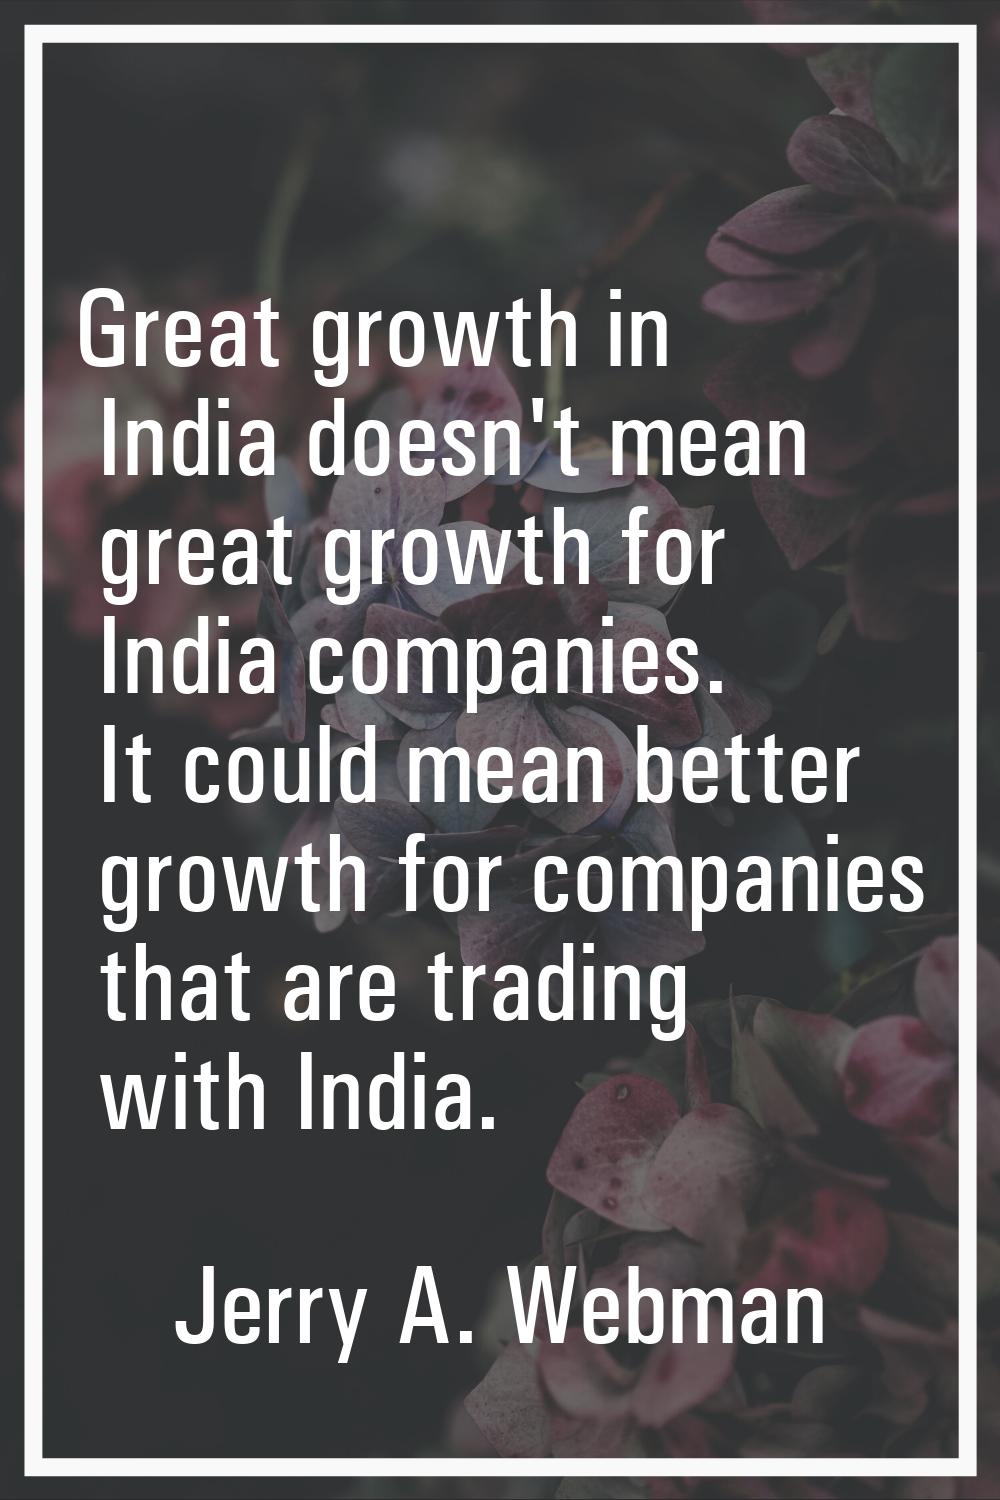 Great growth in India doesn't mean great growth for India companies. It could mean better growth fo